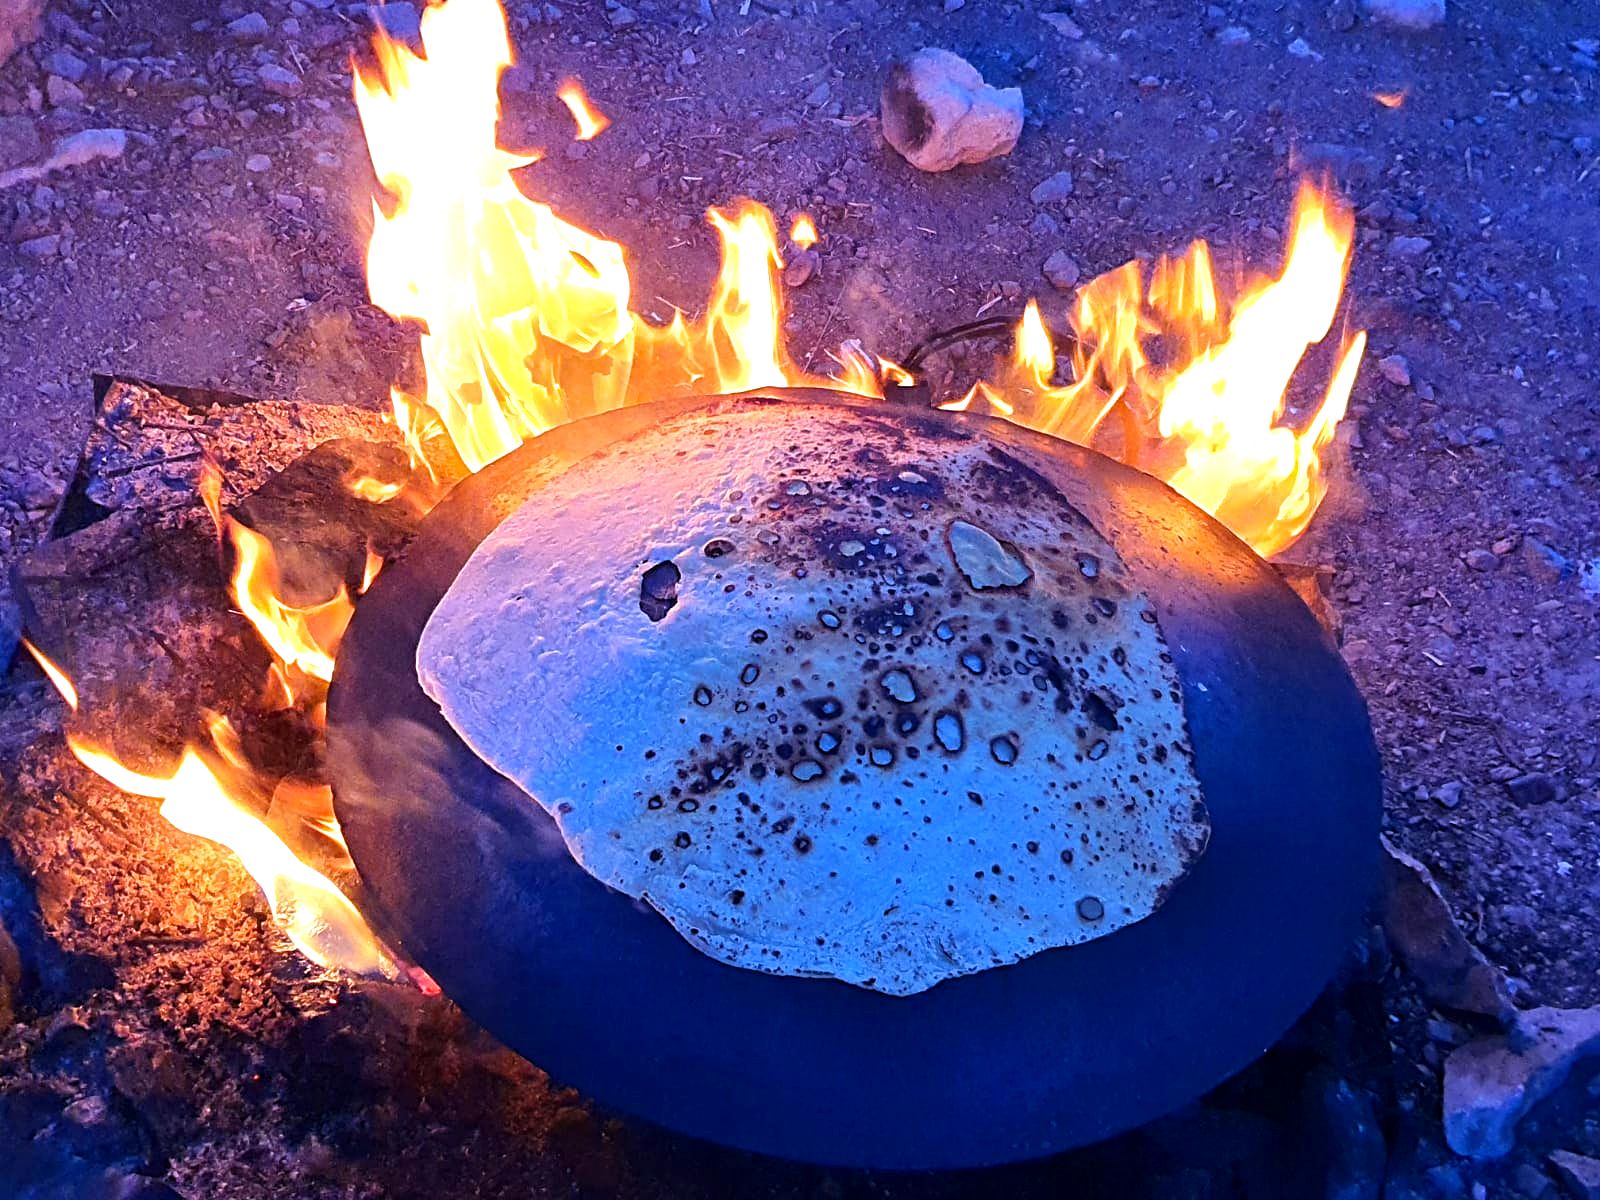 Traditional Bedouin flatbread getting baked on a tabun in the Negev desert